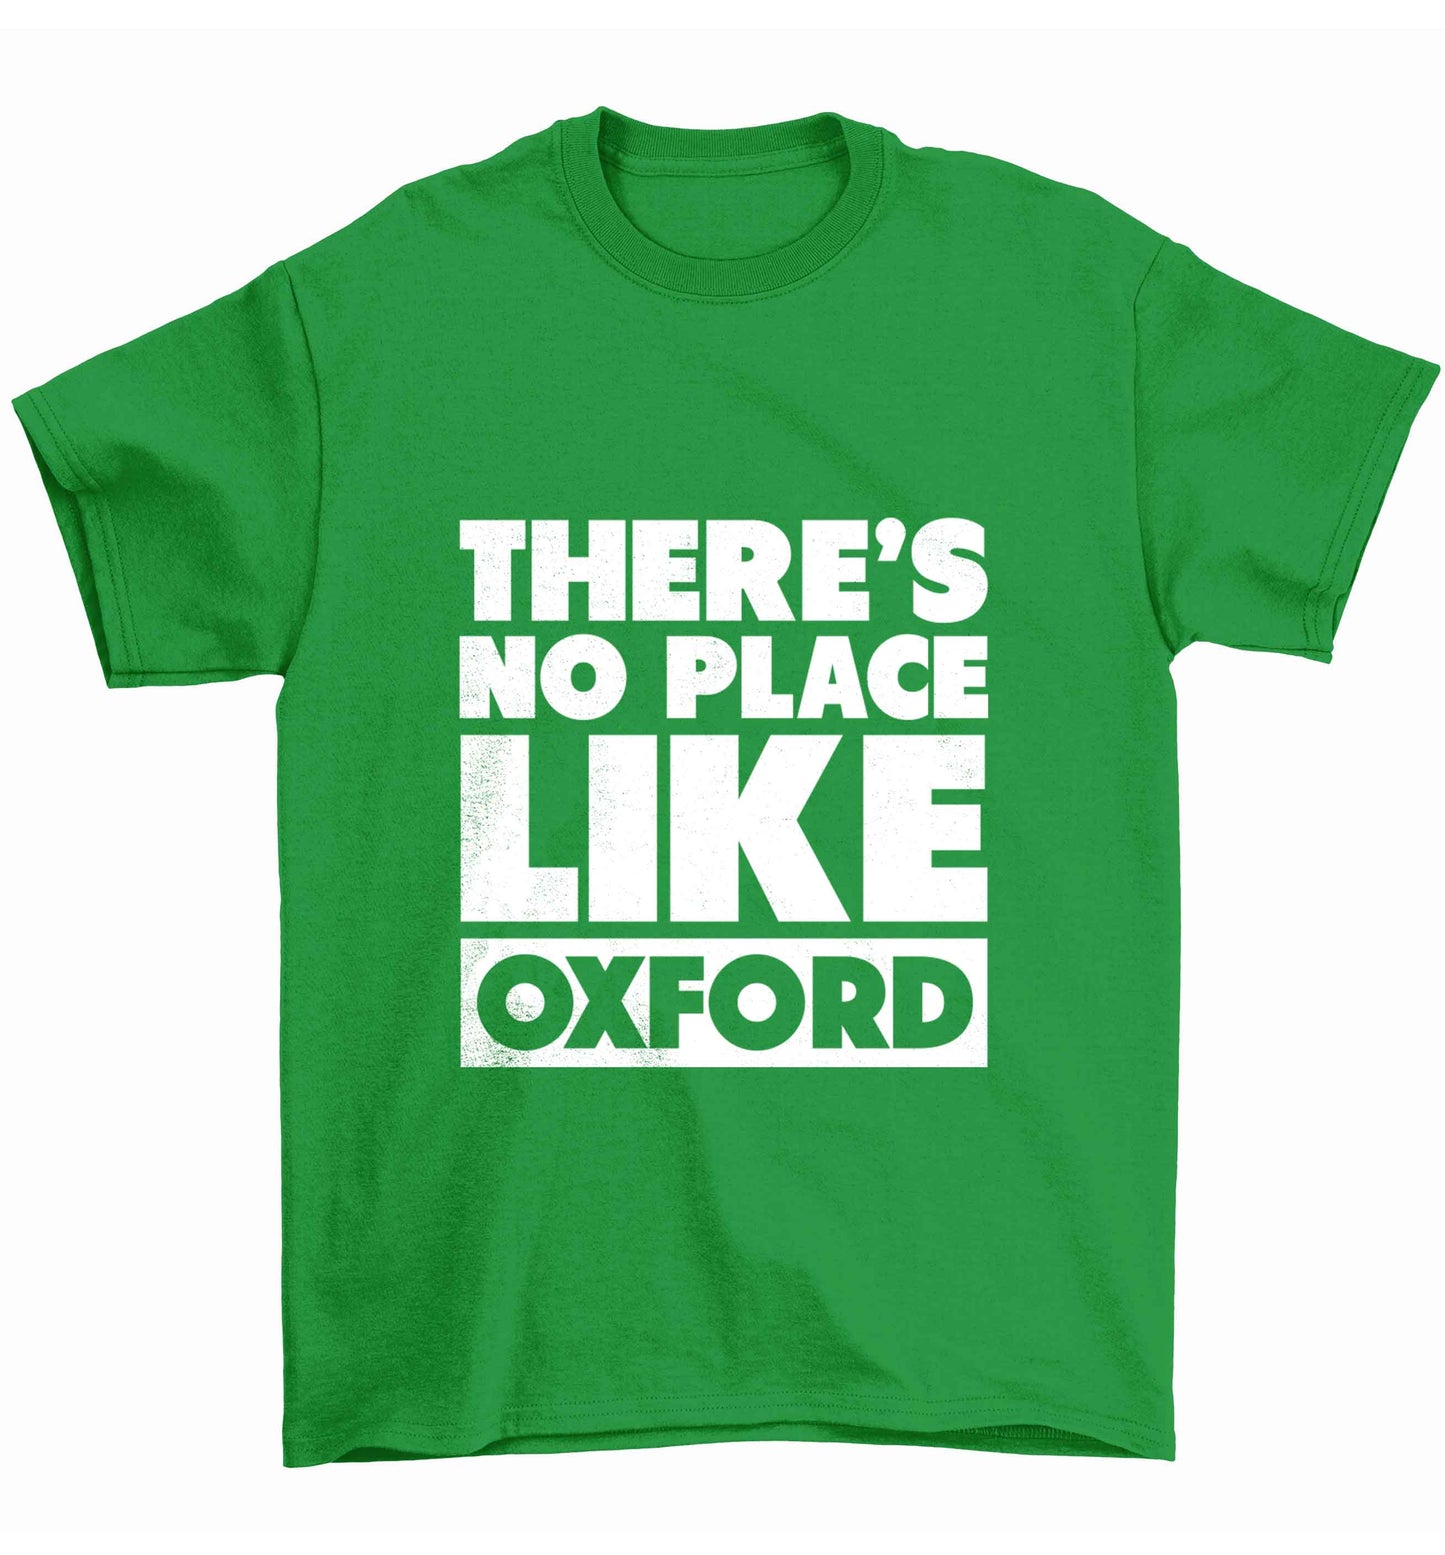 There's no place like Oxford Children's green Tshirt 12-13 Years